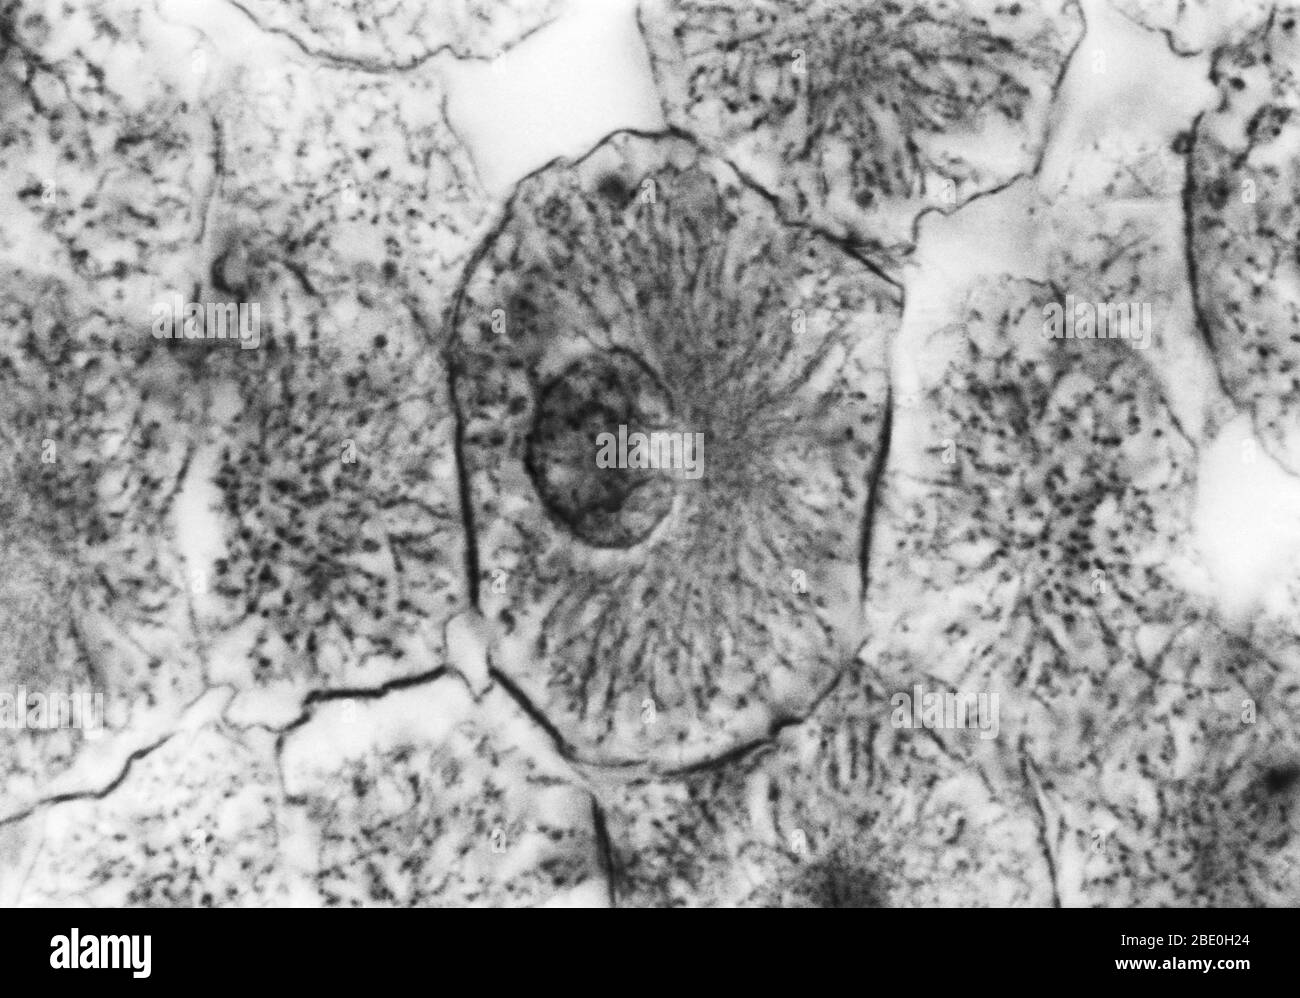 Light micrograph showing mitosis in whitefish blastula, prophase. No magnification given. Mitosis, the usual method of cell division, characterized typically by the resolving of the chromatin of the nucleus into a threadlike form, which condenses into chromosomes, each of which separates longitudinally into two parts, one part of each chromosome being retained in each of two new cells resulting from the original cell. The four main phases of mitosis are prophase, metaphase, anaphase, and telophase. Blastula, an animal embryo at the stage immediately following the division of the fertilized egg Stock Photo